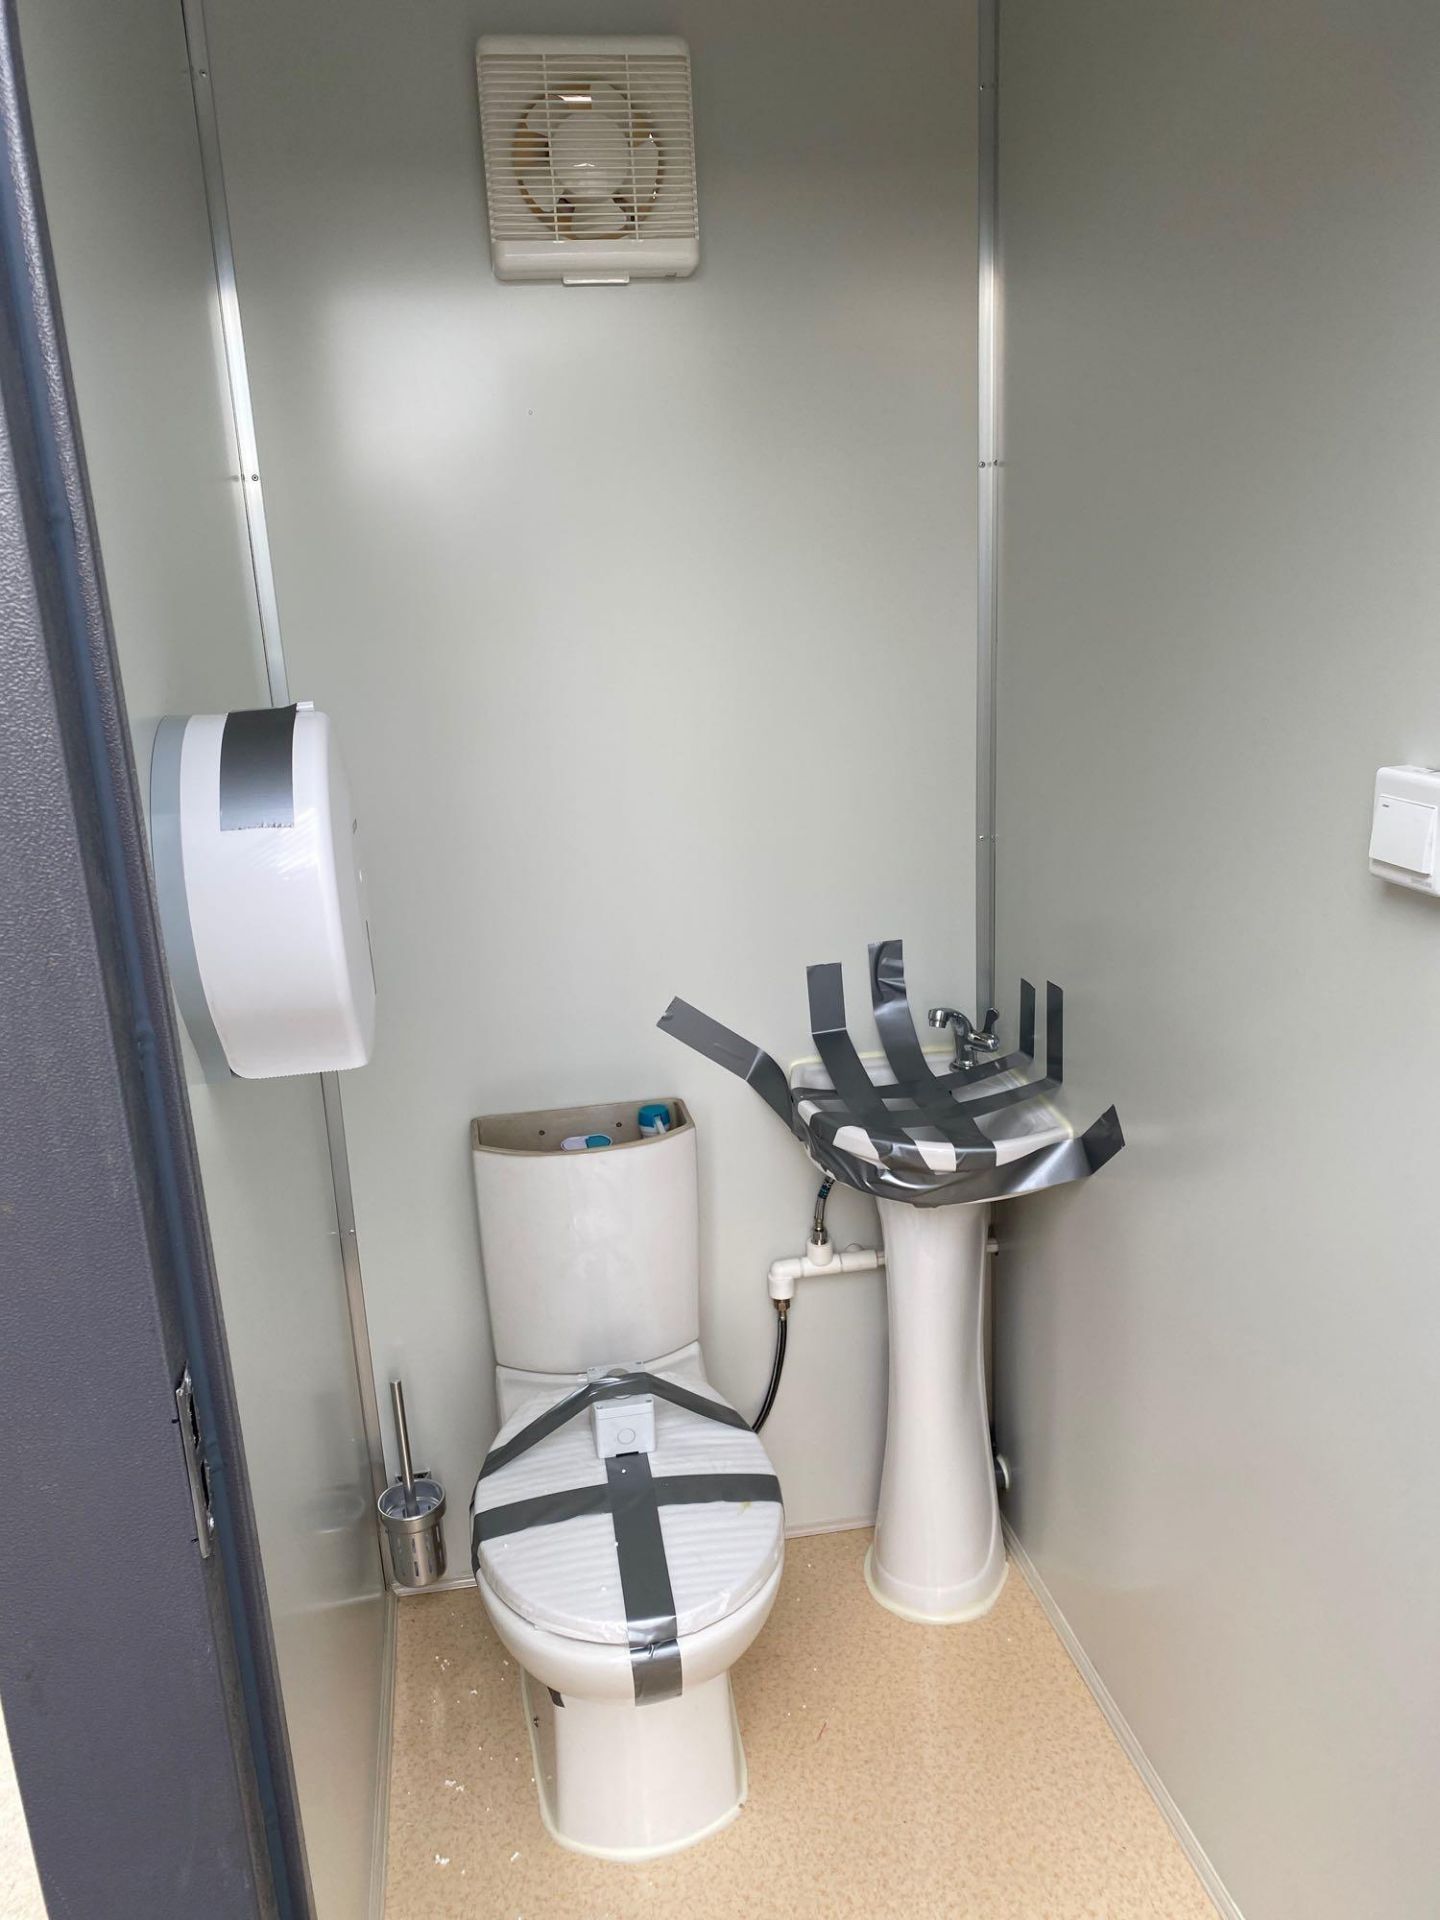 UNUSED PORTABLE 2 STALL BATHROOM UNIT. PLUMBING AND ELECTRIC HOOKUP, FORK POCKETS - Image 5 of 6